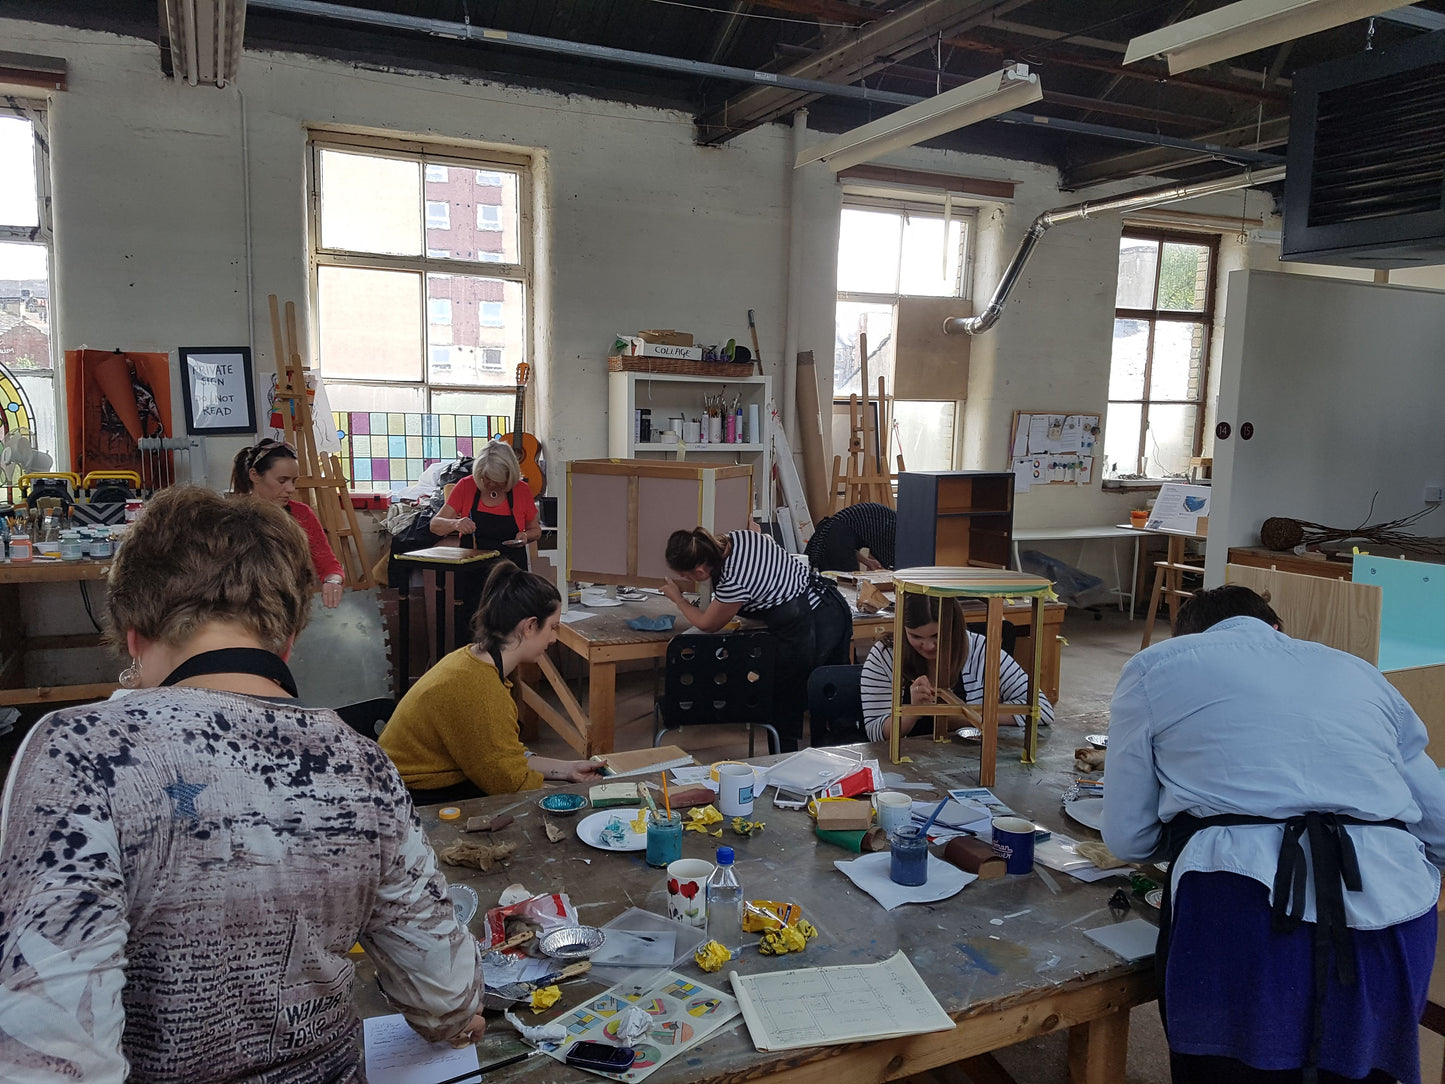 TWO DAY WORKSHOP: In-depth Furniture Upcycling & Design - Booking now